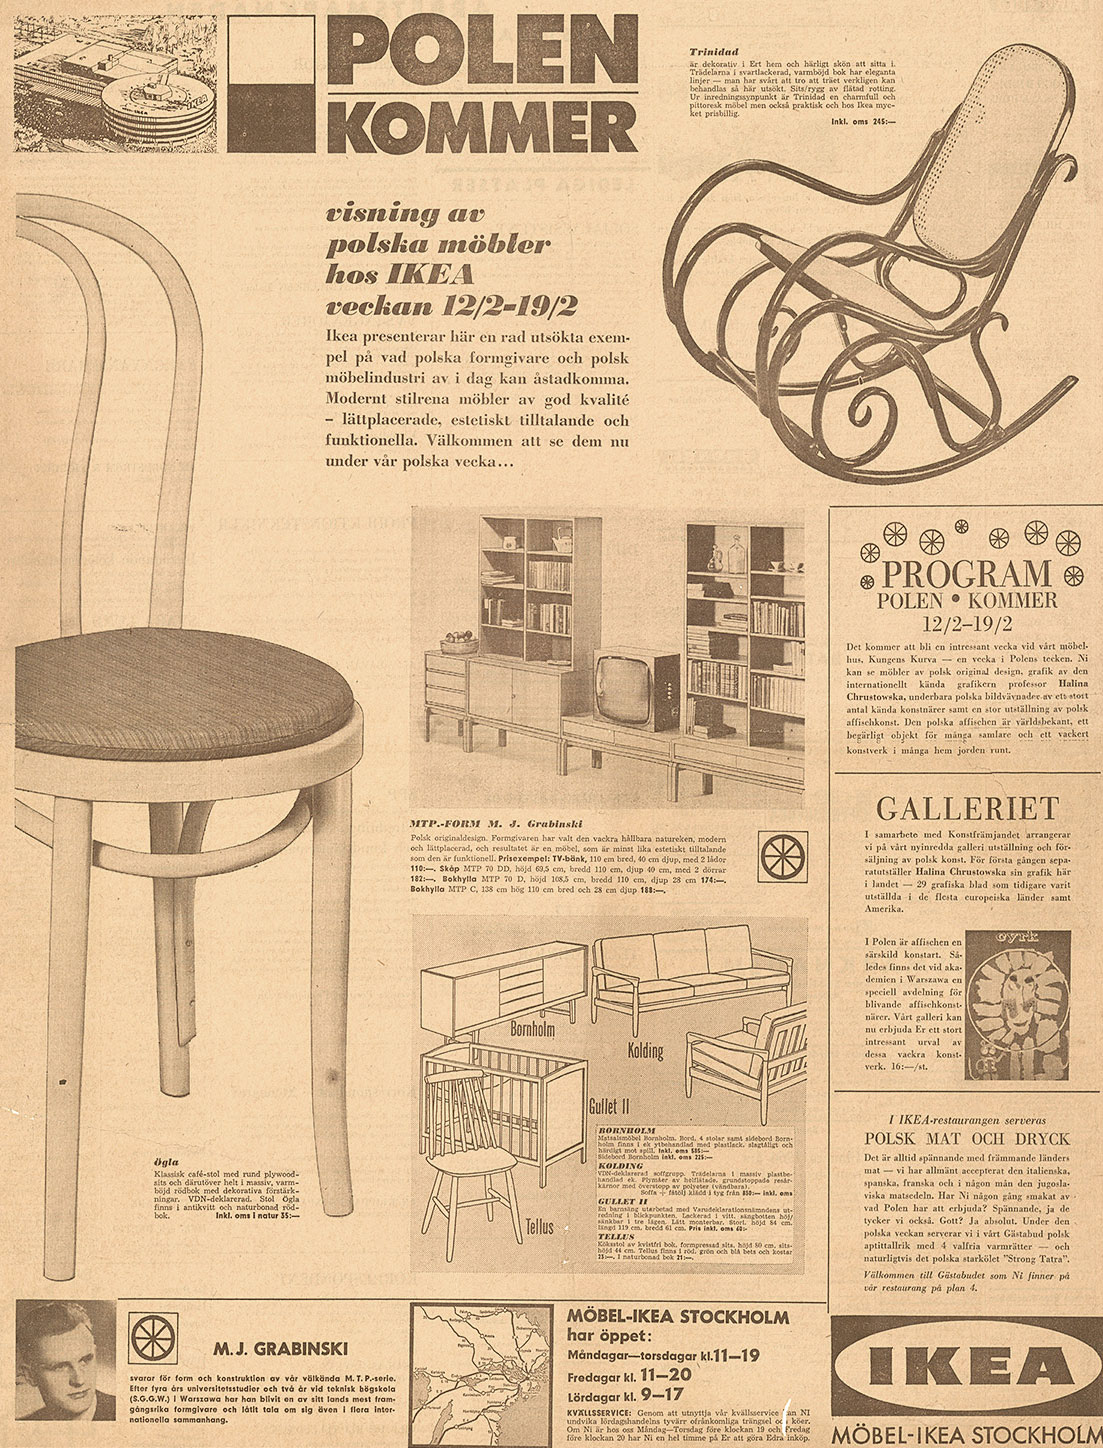 Yellowed Swedish newspaper ad, illustrations and photos of furniture made in Poland.